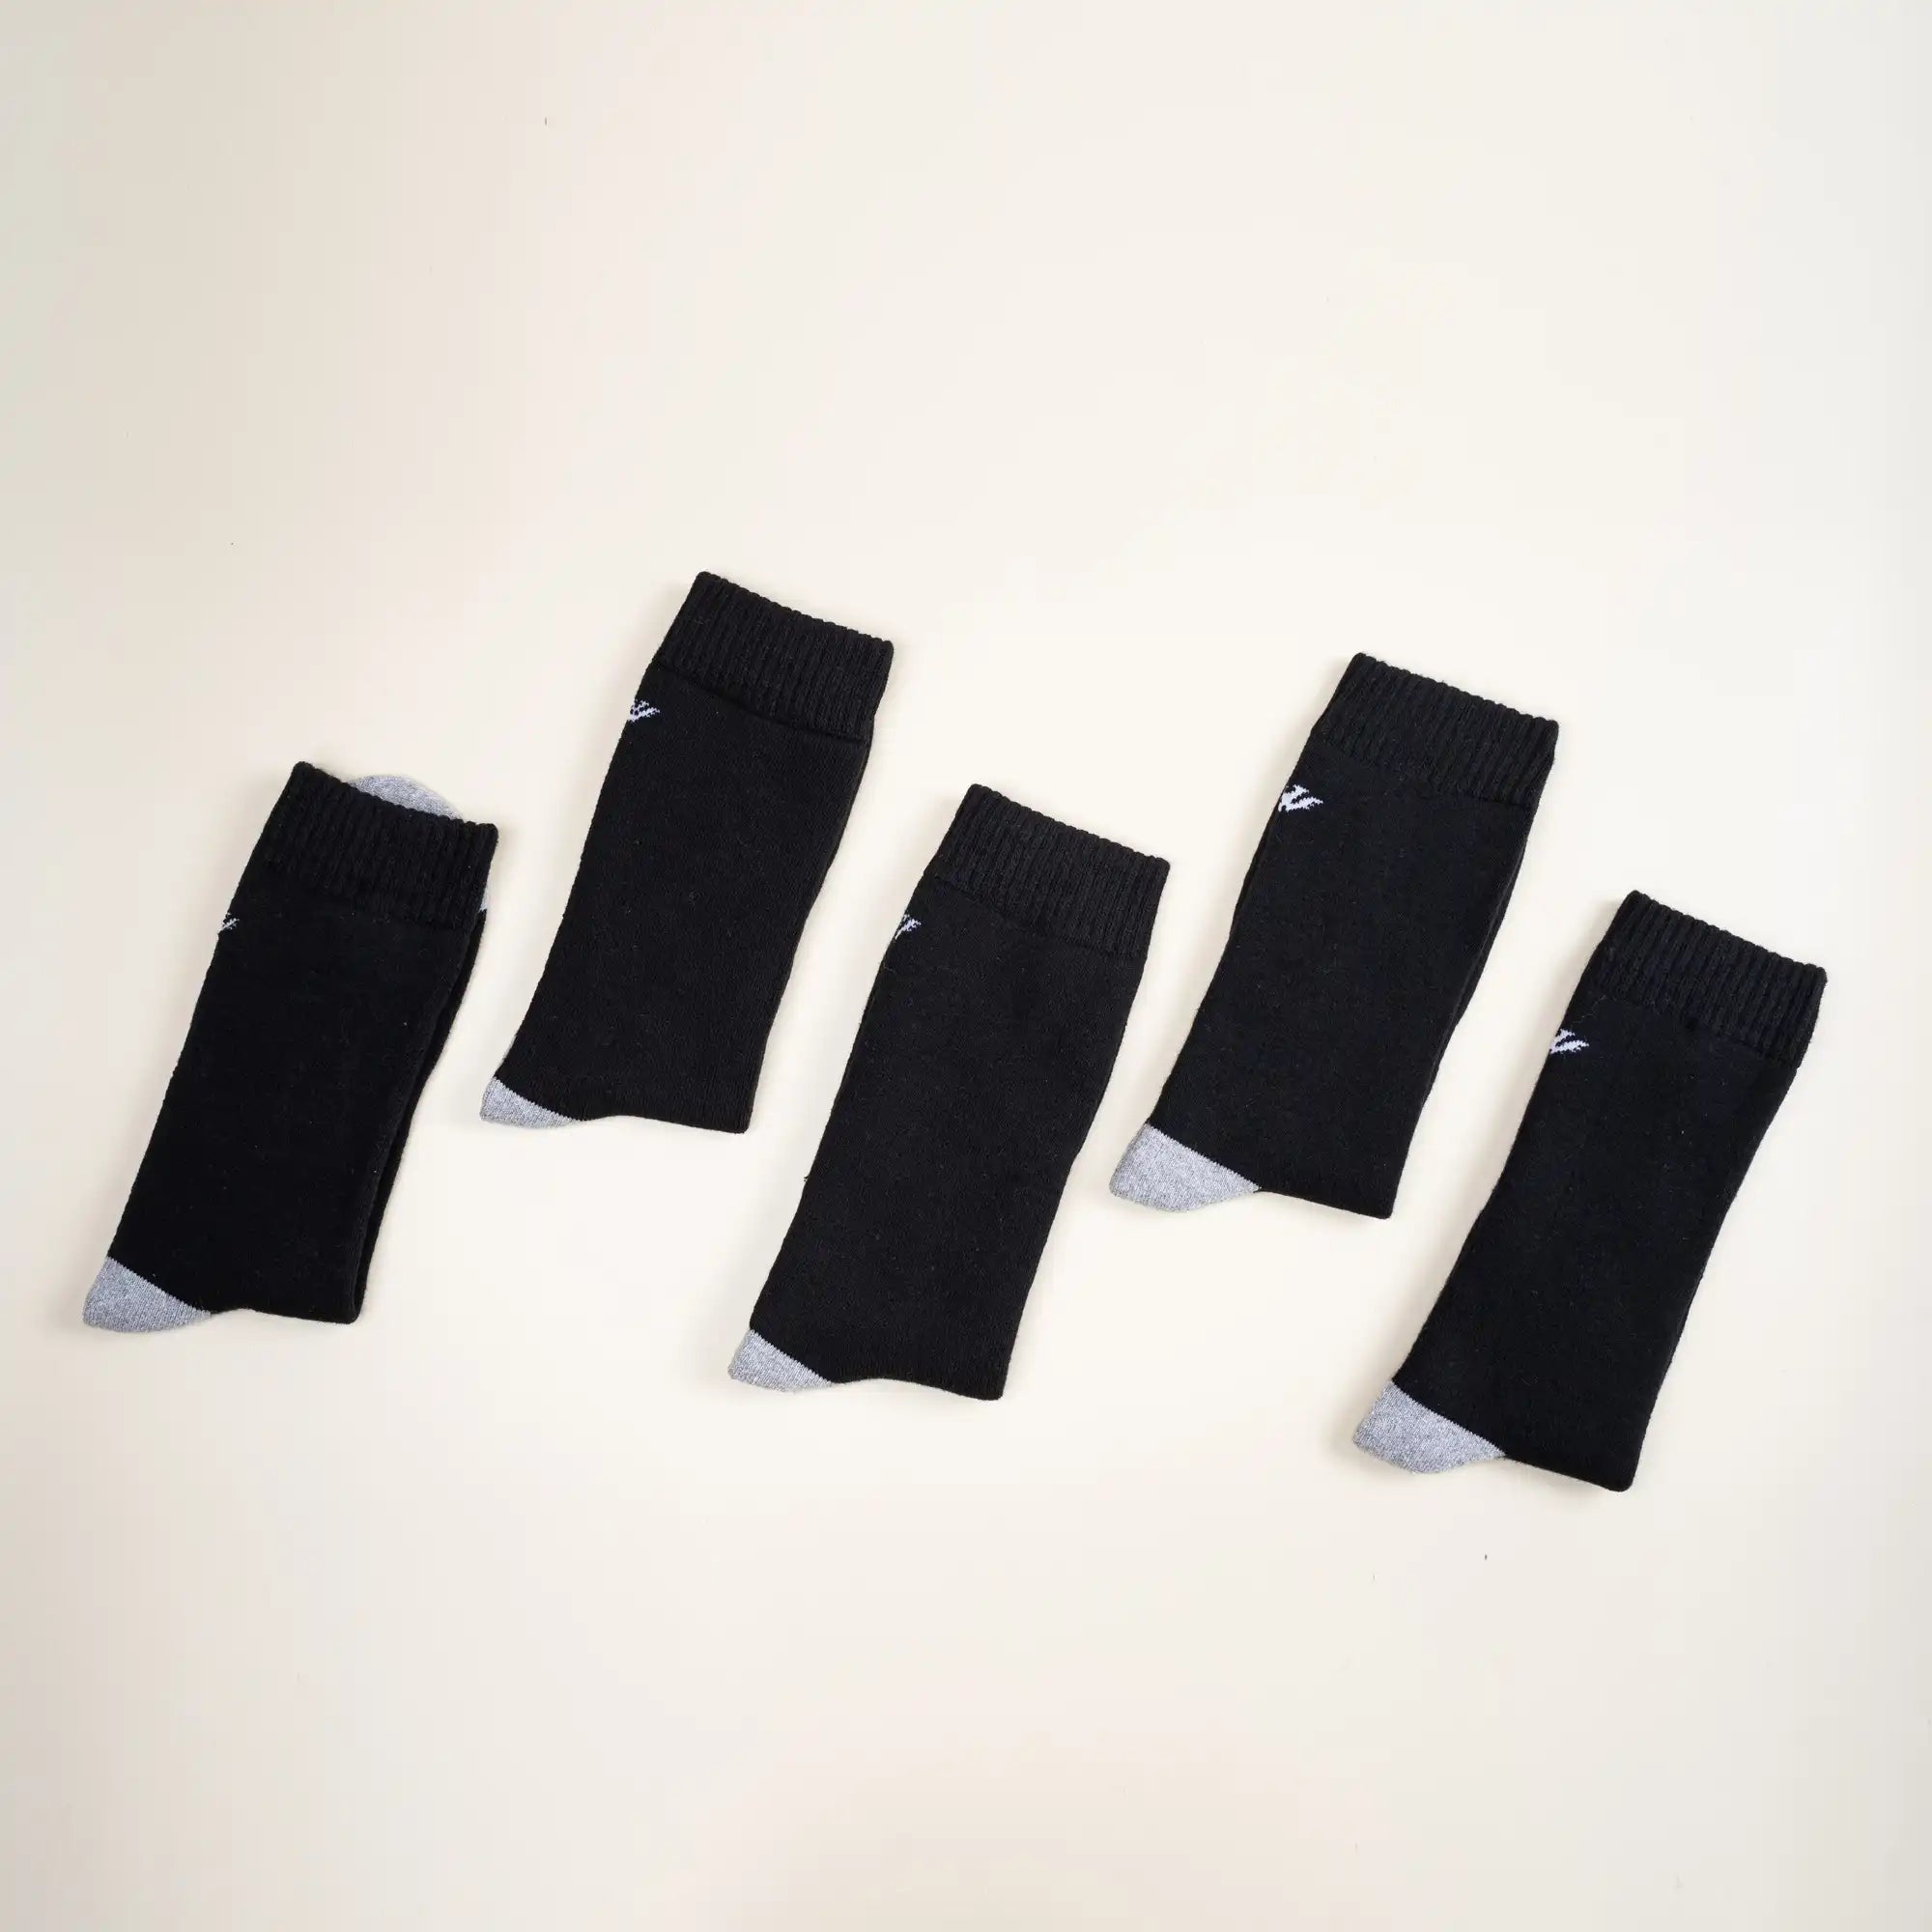 Young Wings Men's Black Colour Cotton Fabric Solid Full Length Socks - Pack of 3, Style no. M1-306 N